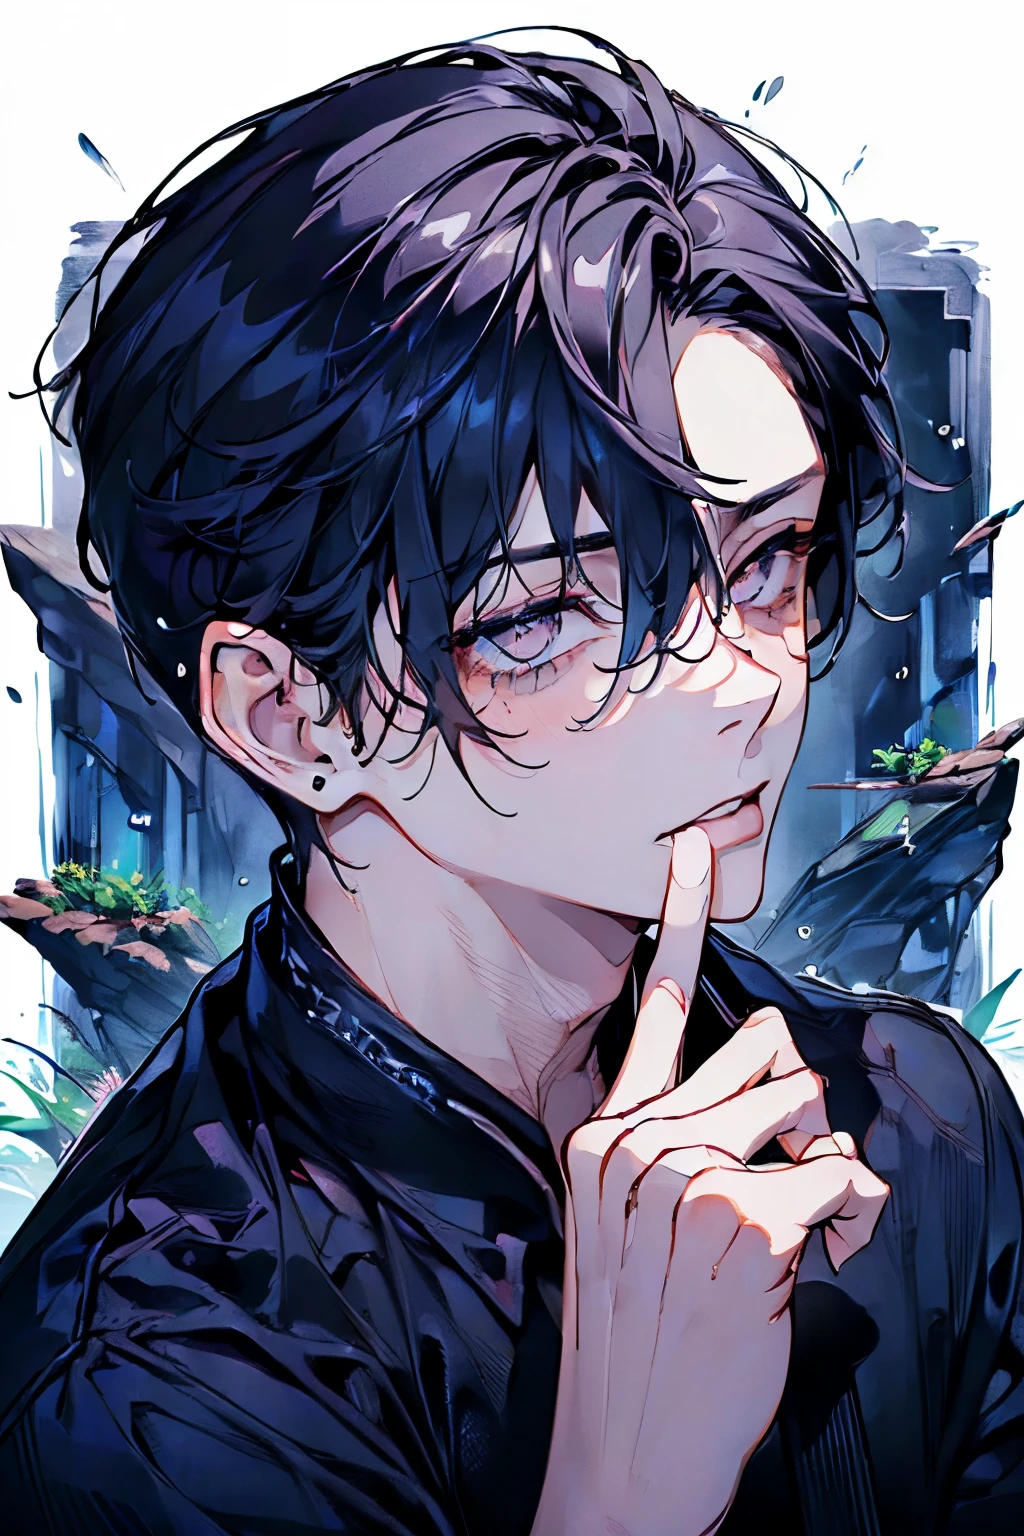 ((male:1.5)),(forhead mark),((dark NAVY hair)),((rainy:1.2)),(hand to own mouth:1.3),((Glossy lips:1.2)),(nsfw:1.0),((high quality:1.2)),((perfect graphic:1.2)),((beautiful image:1.2)),((high resolution:1.2)),blush,(marine:1.2),((Wet Hair:1.3)),((perfect hand:1.0))